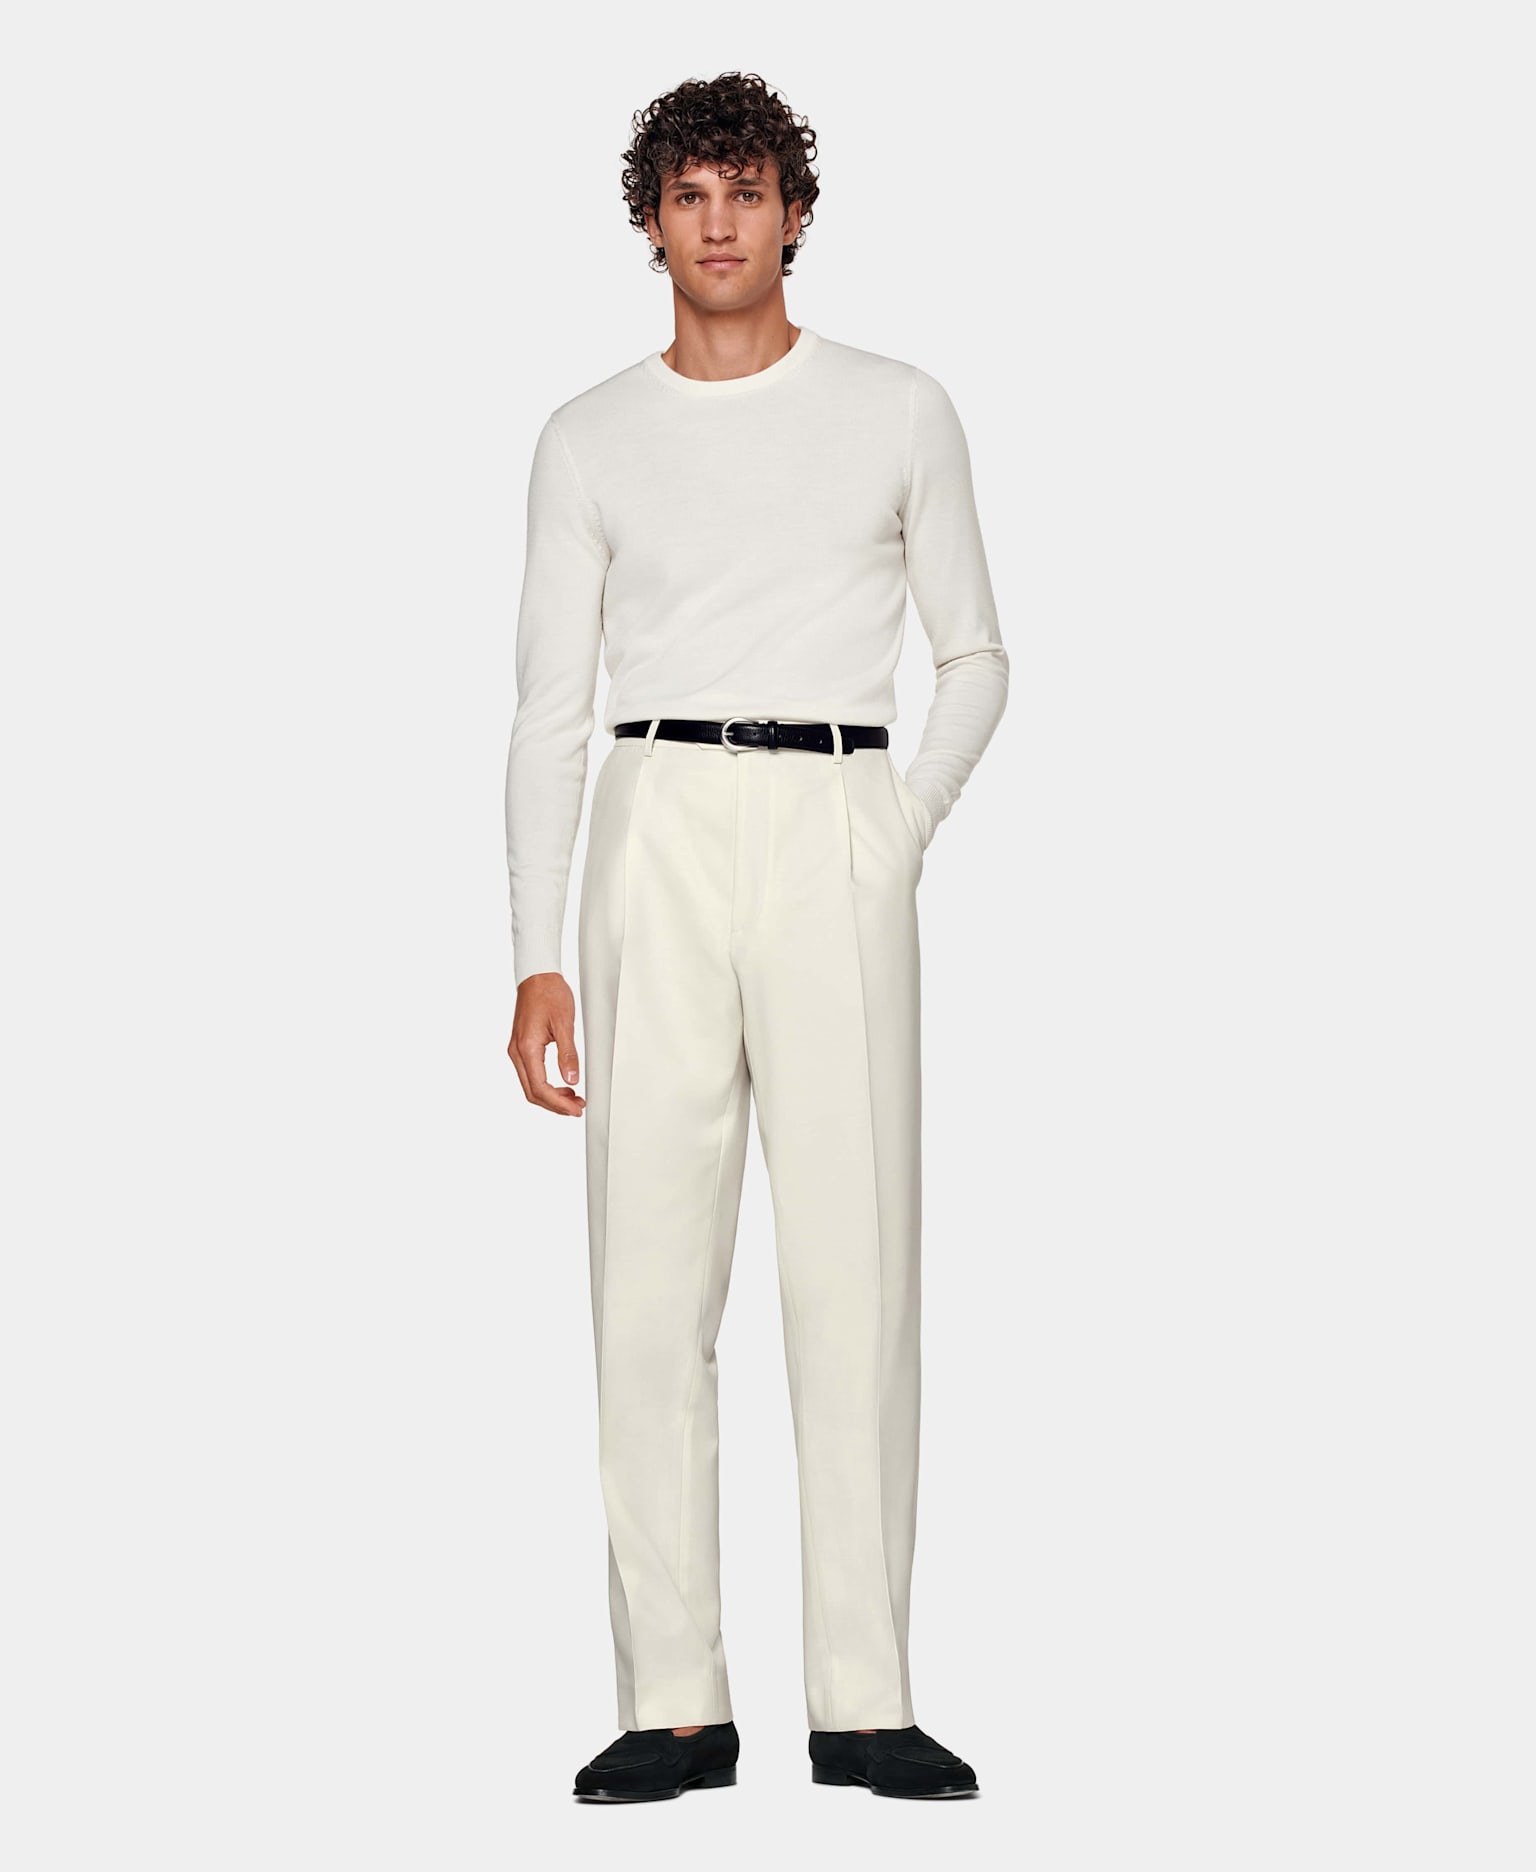 White & off-white sweater and straight-fight trouser combo with black belt and loafers.